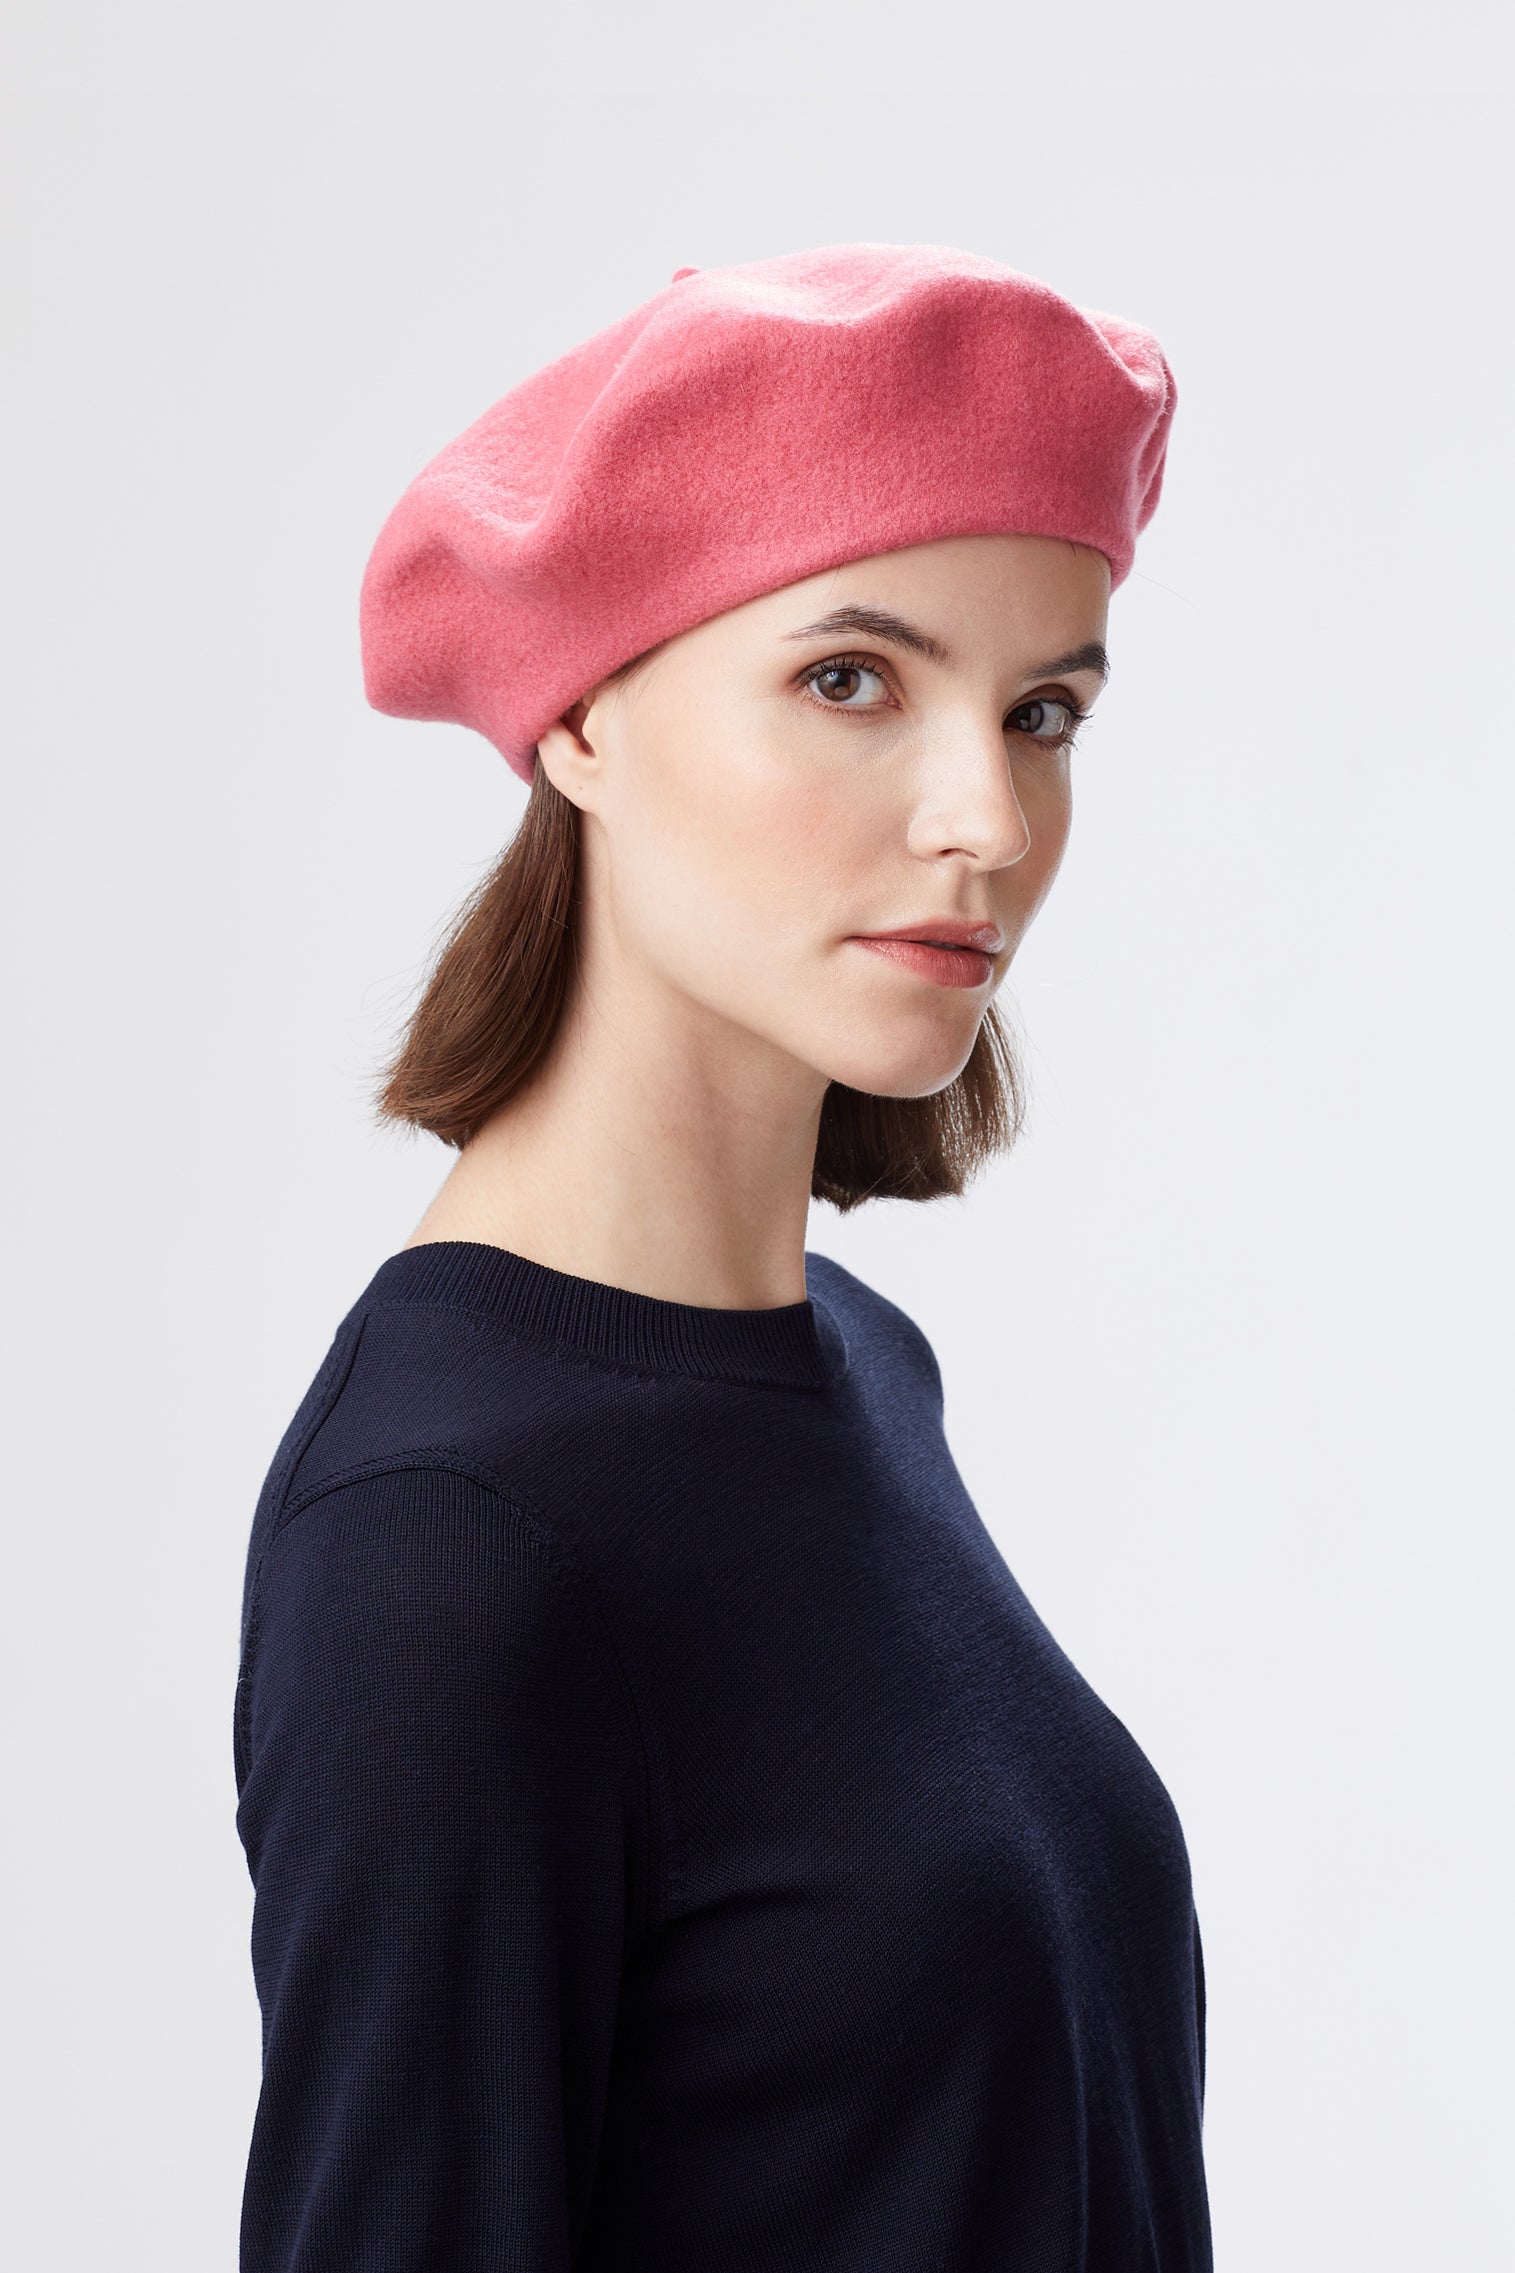 French Beret - Lock & Co. Christmas Gift Edit - Lock & Co. Hatters London UK